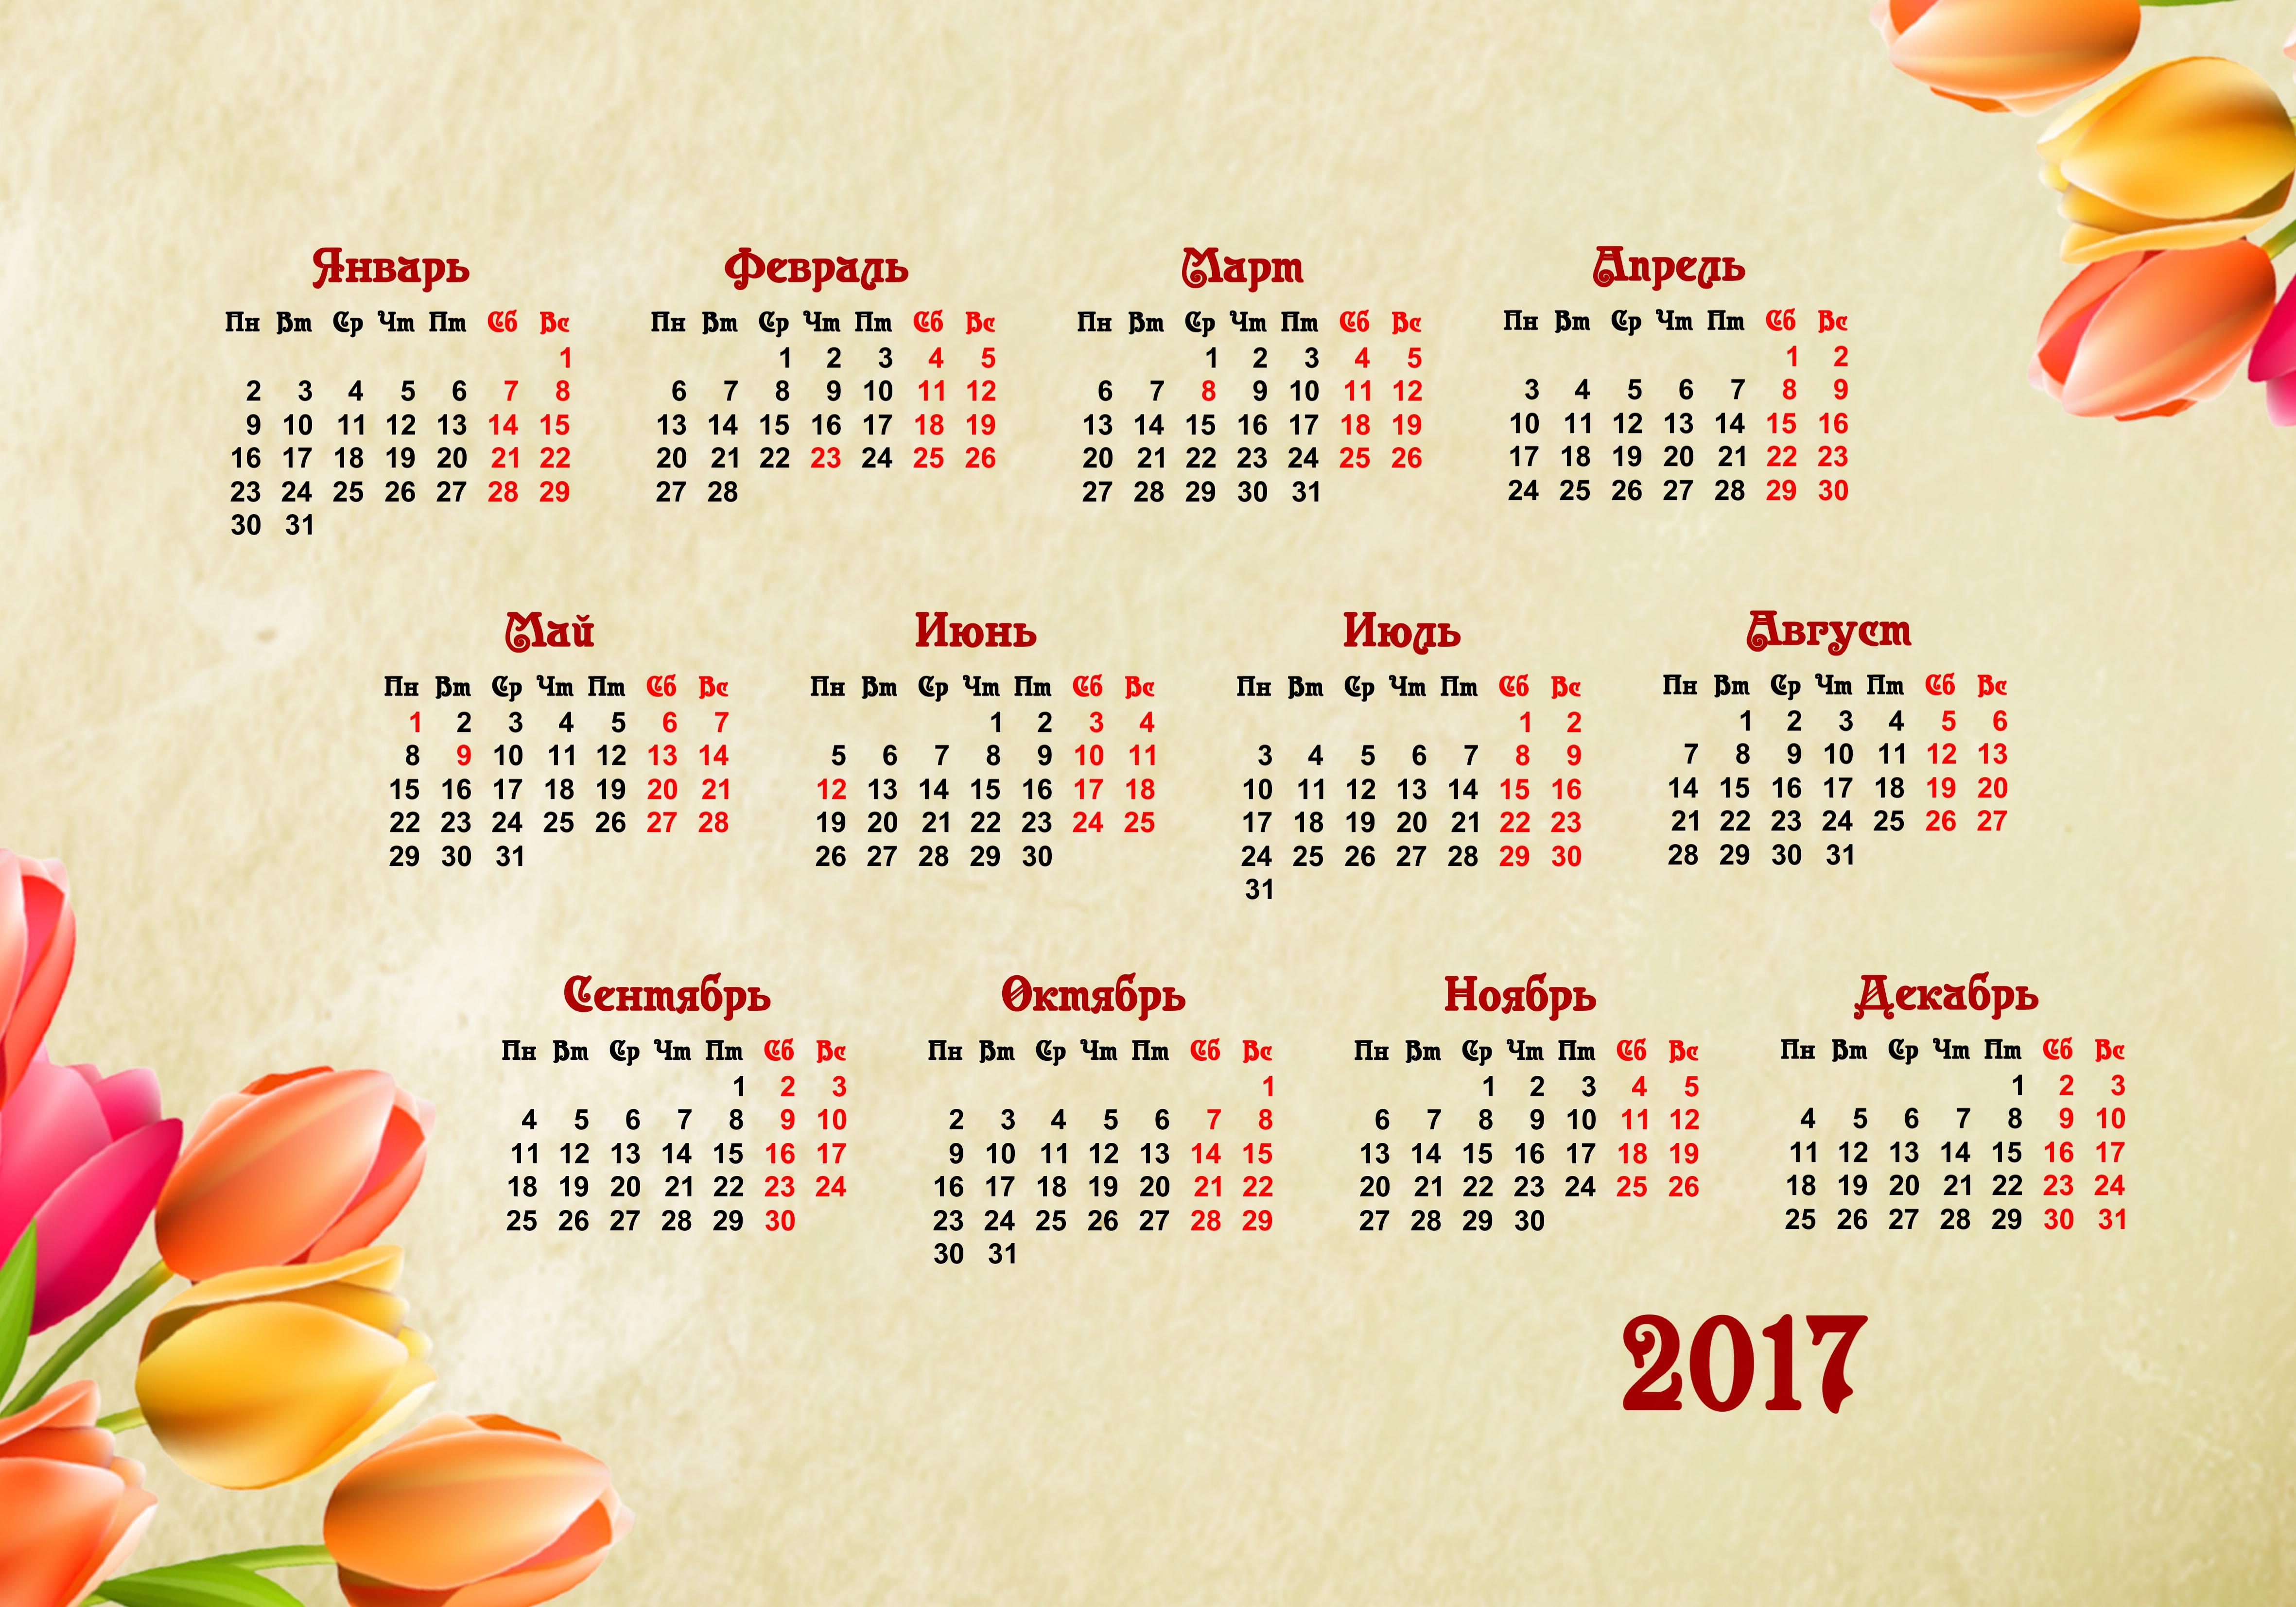 Wallpapers 2017 year of the rooster calendar grid for 2017 on the desktop